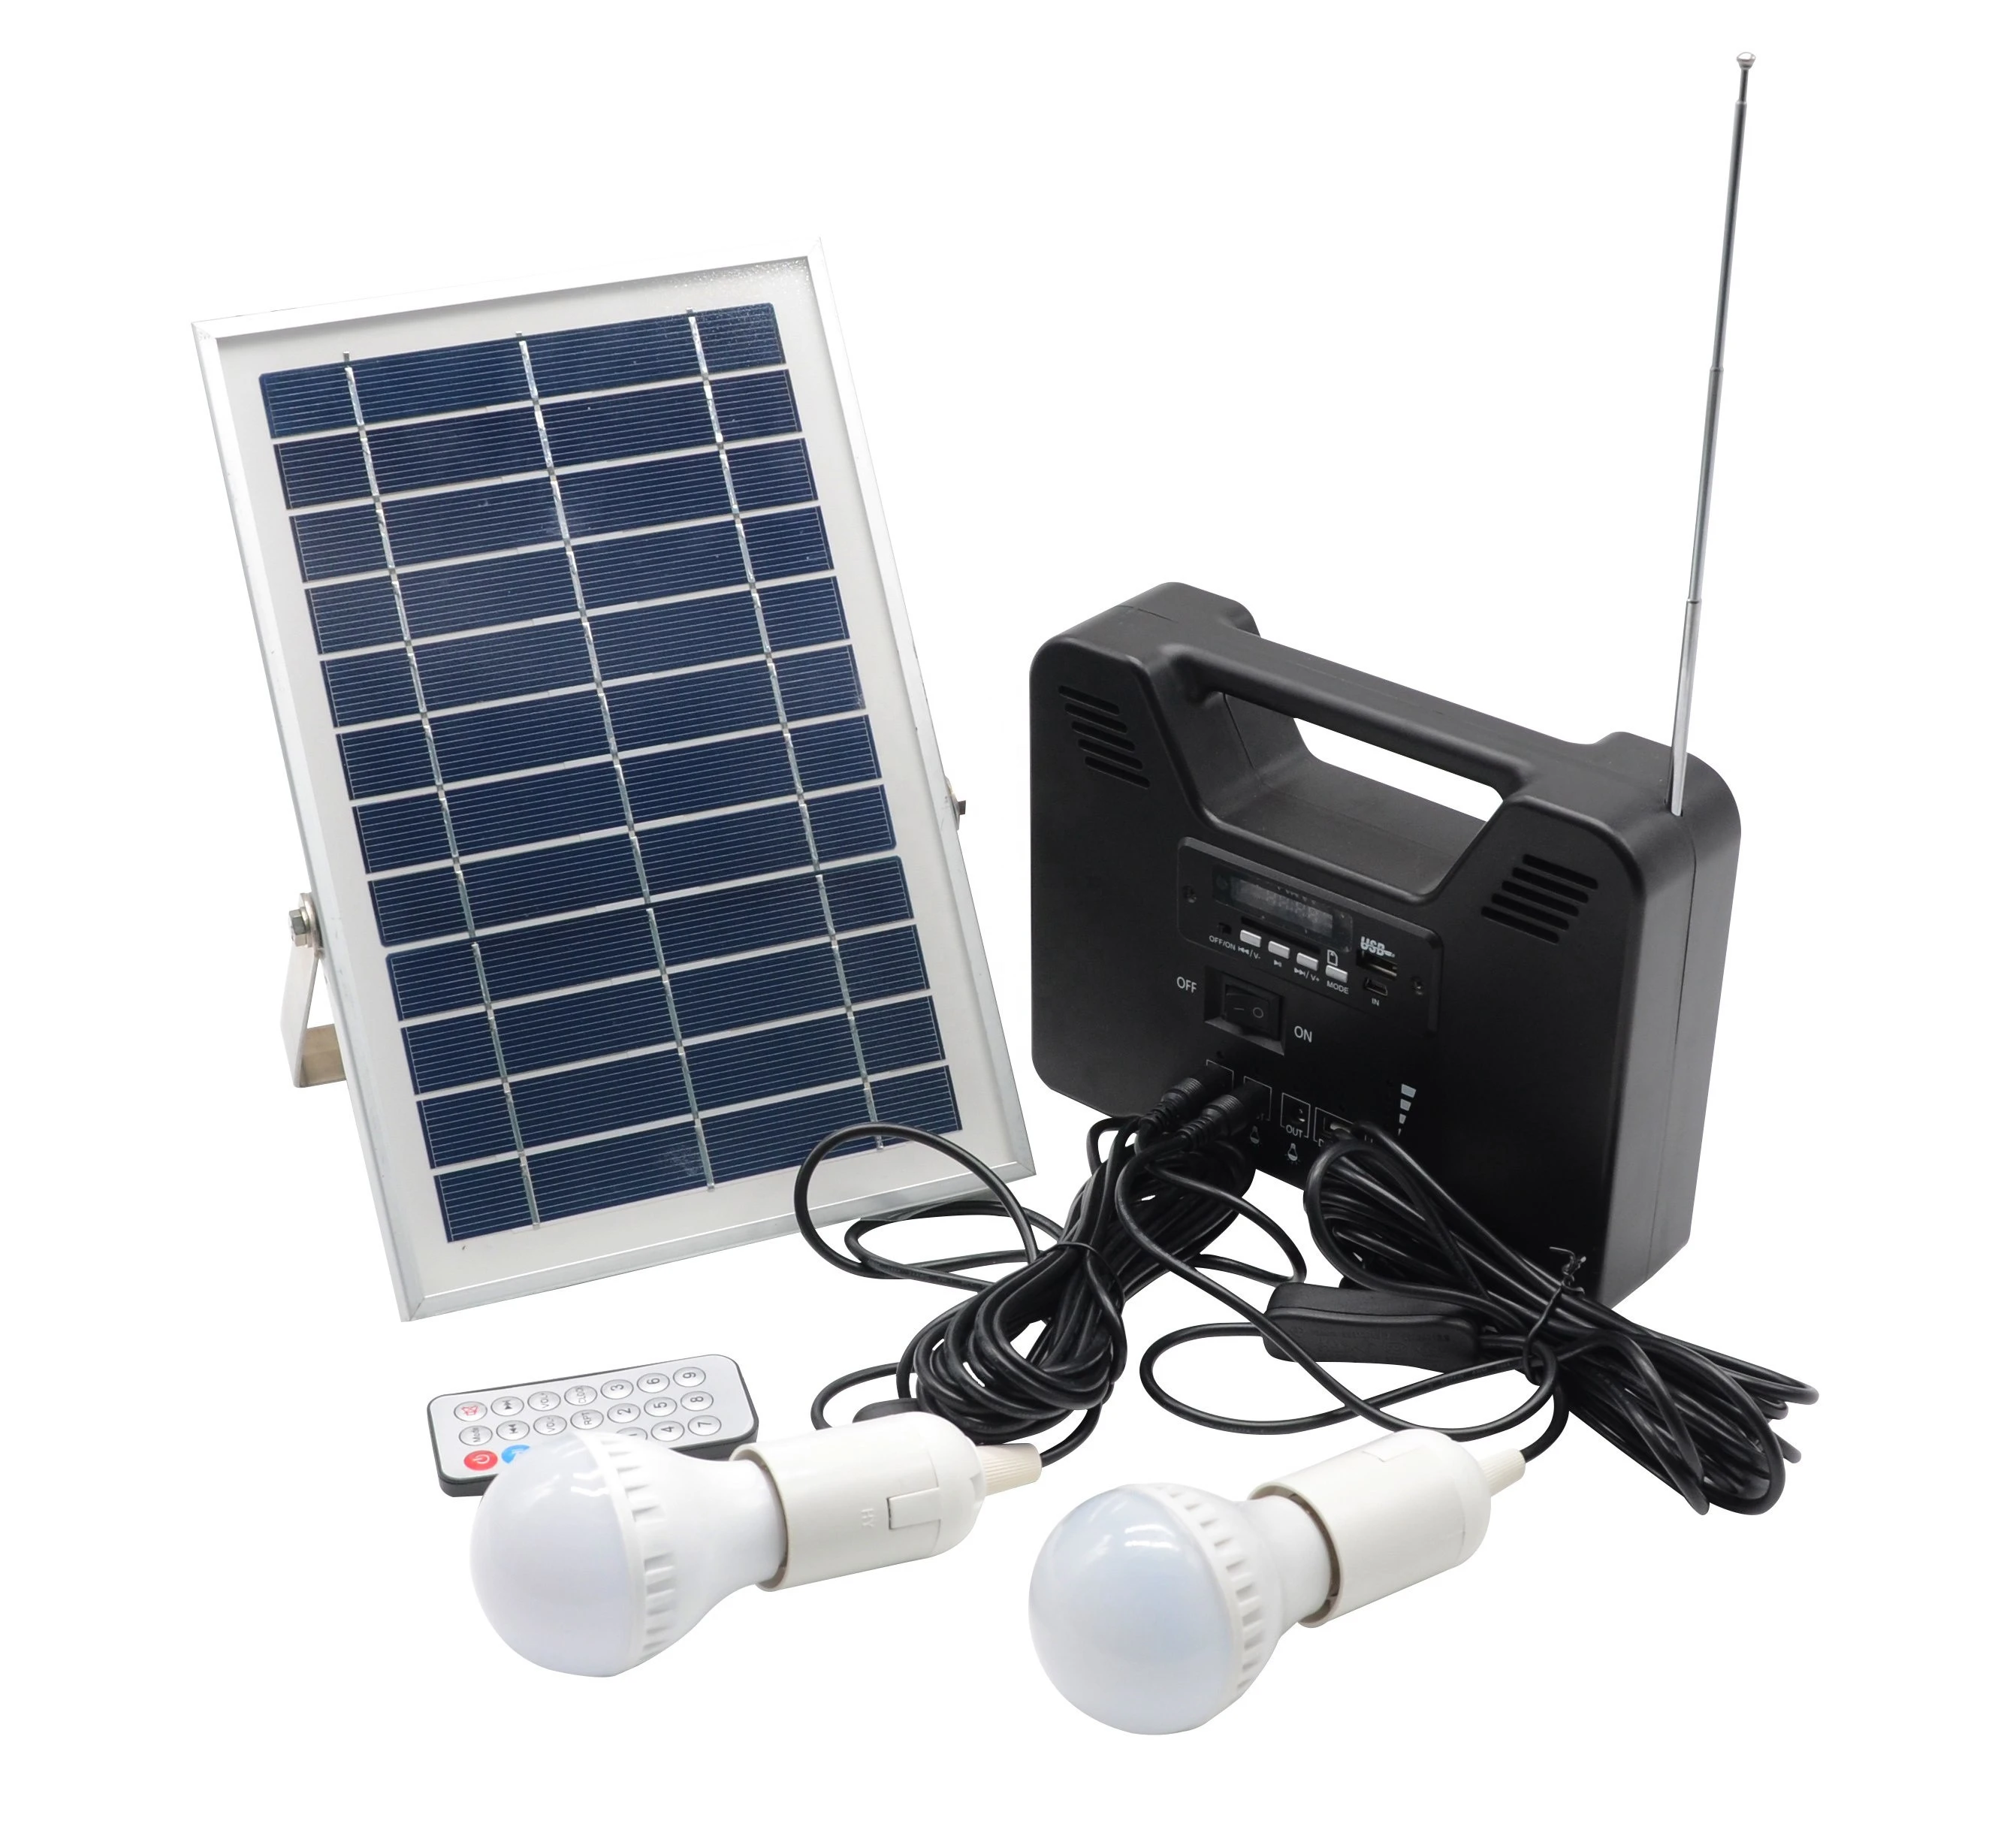 Outdoor Portable solar power generator with MP3 and radio function